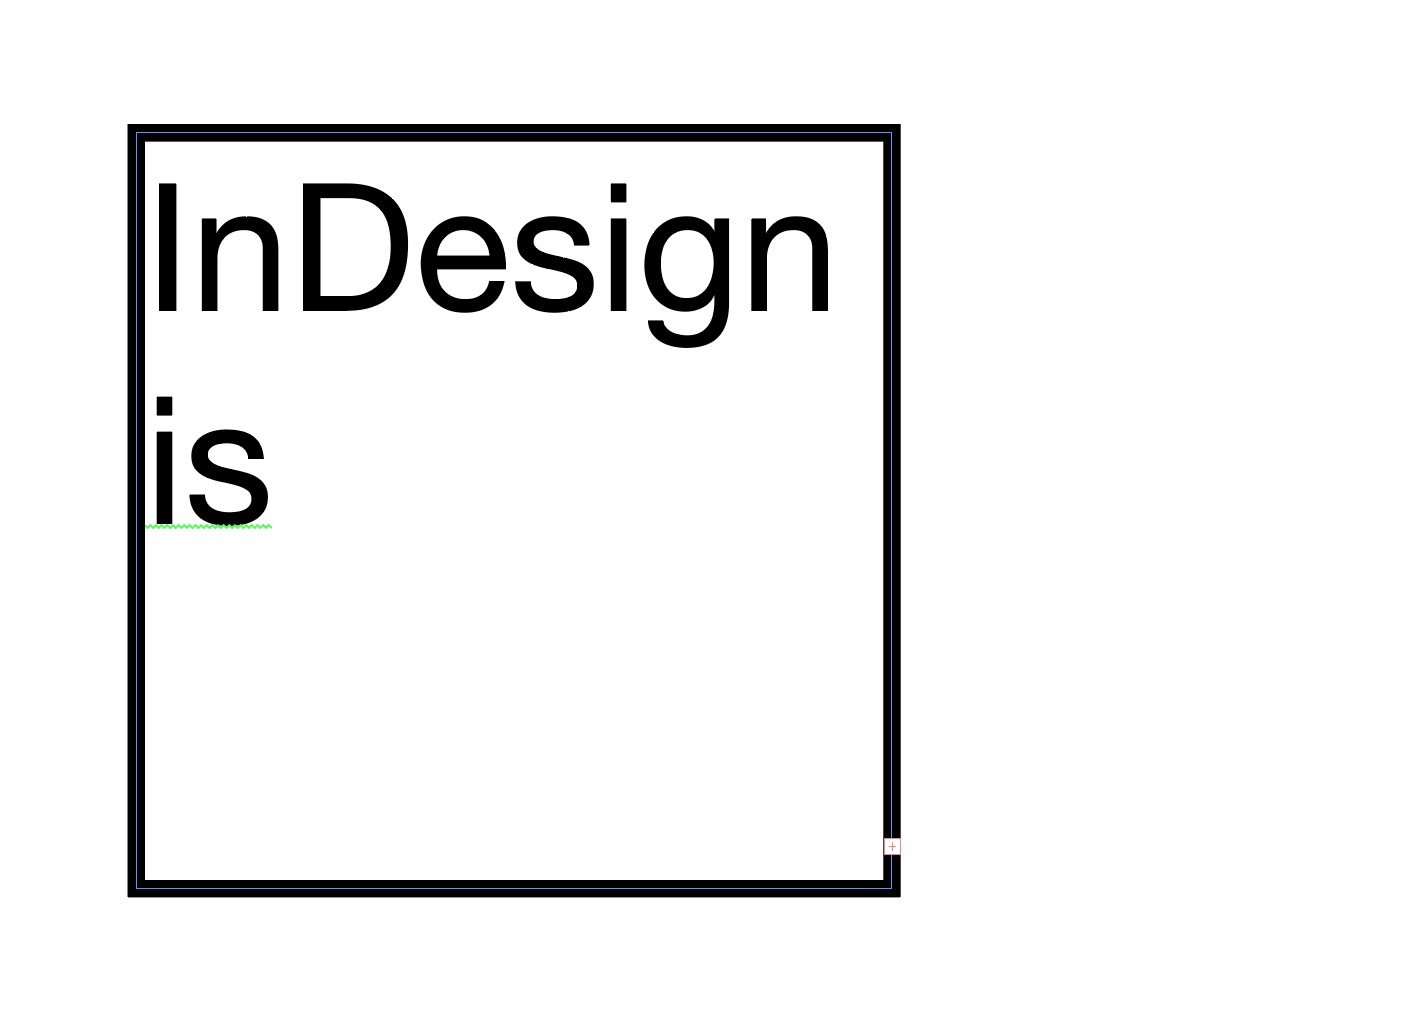 InDesign is [+]